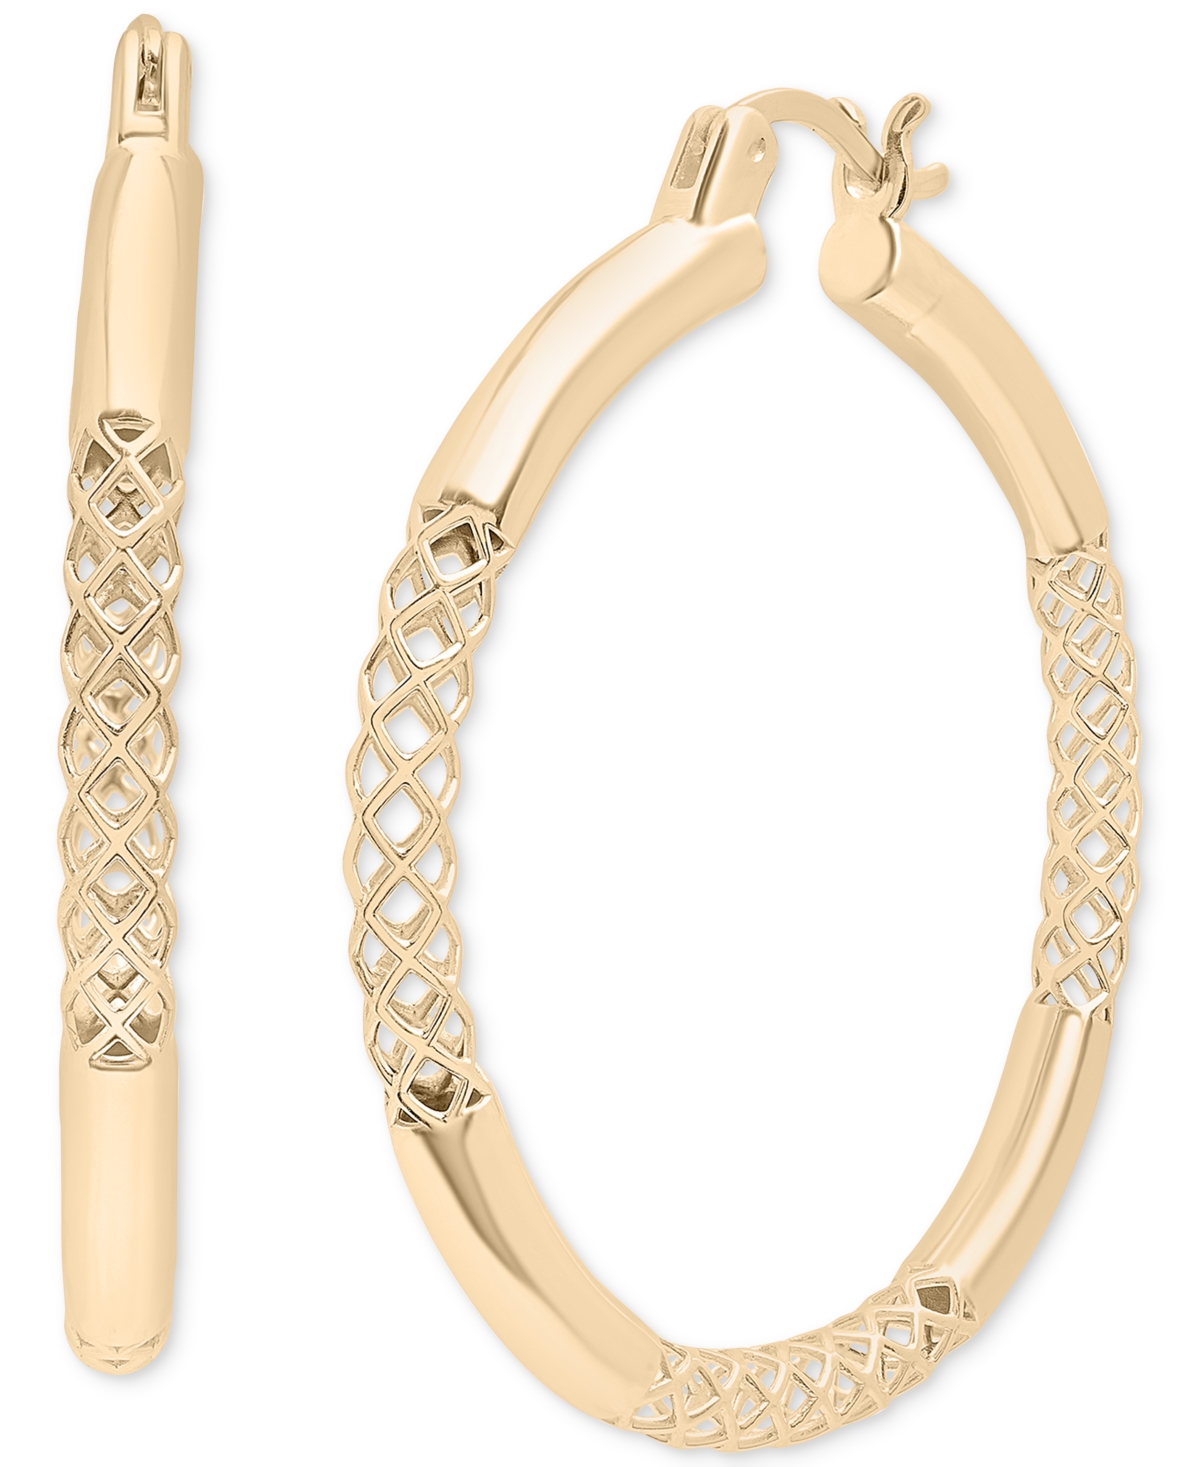 Shop Audrey By Aurate Lattice Extra Small Hoop Earrings In Gold Vermeil, Created For Macy's